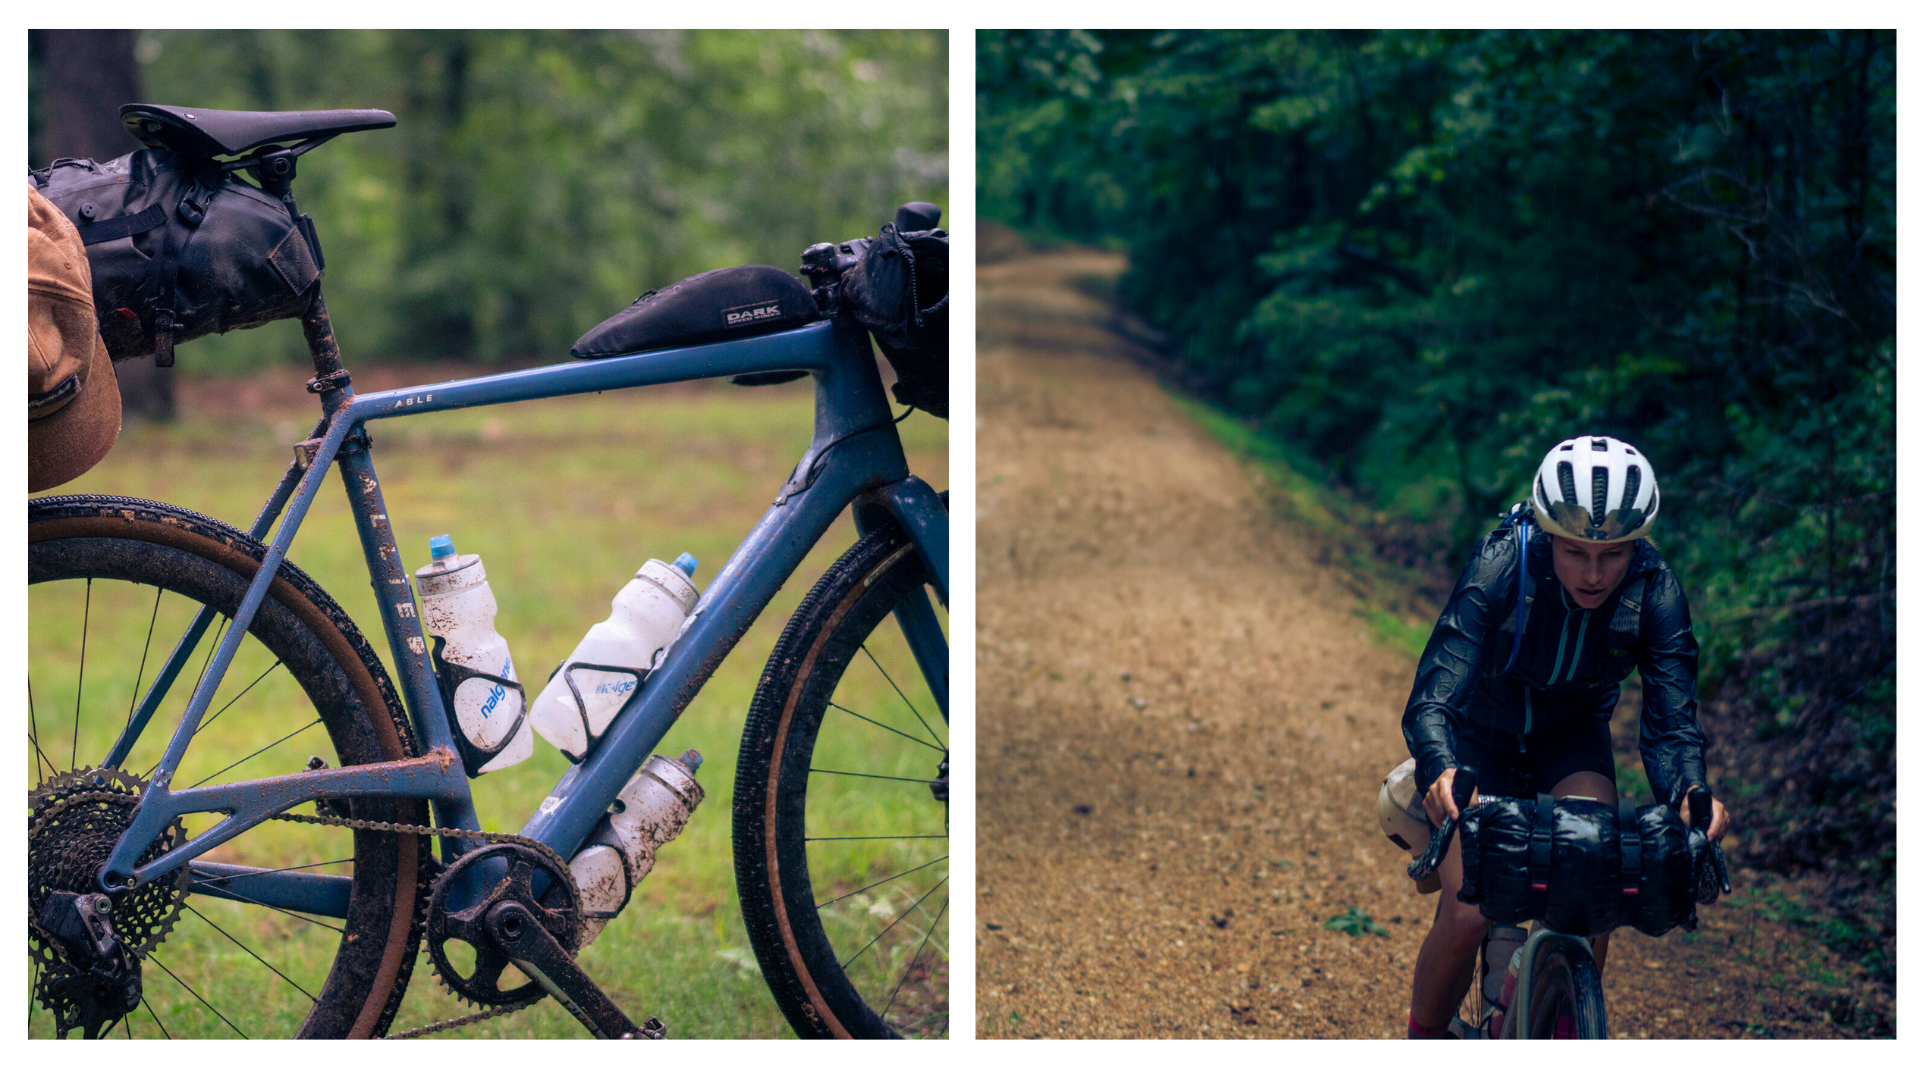 Collage of a photo of a muddy bike and a photo of a female rider riding a climb on a gravel road.